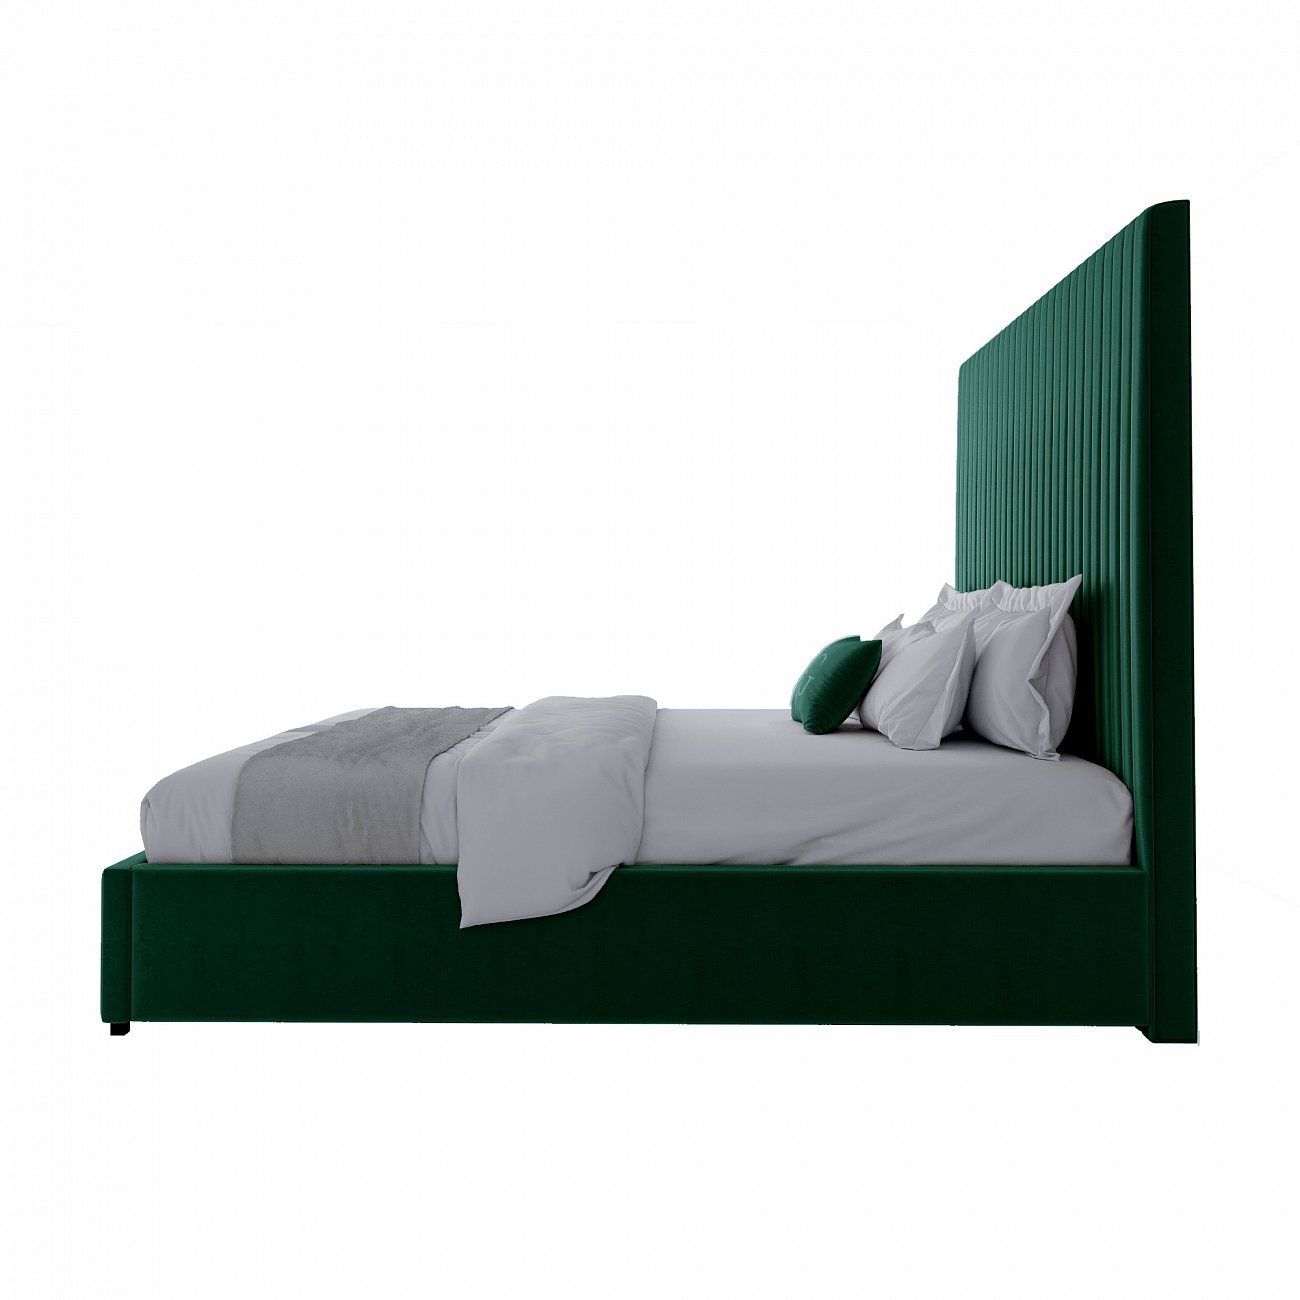 Double bed 180x200 cm green Mora